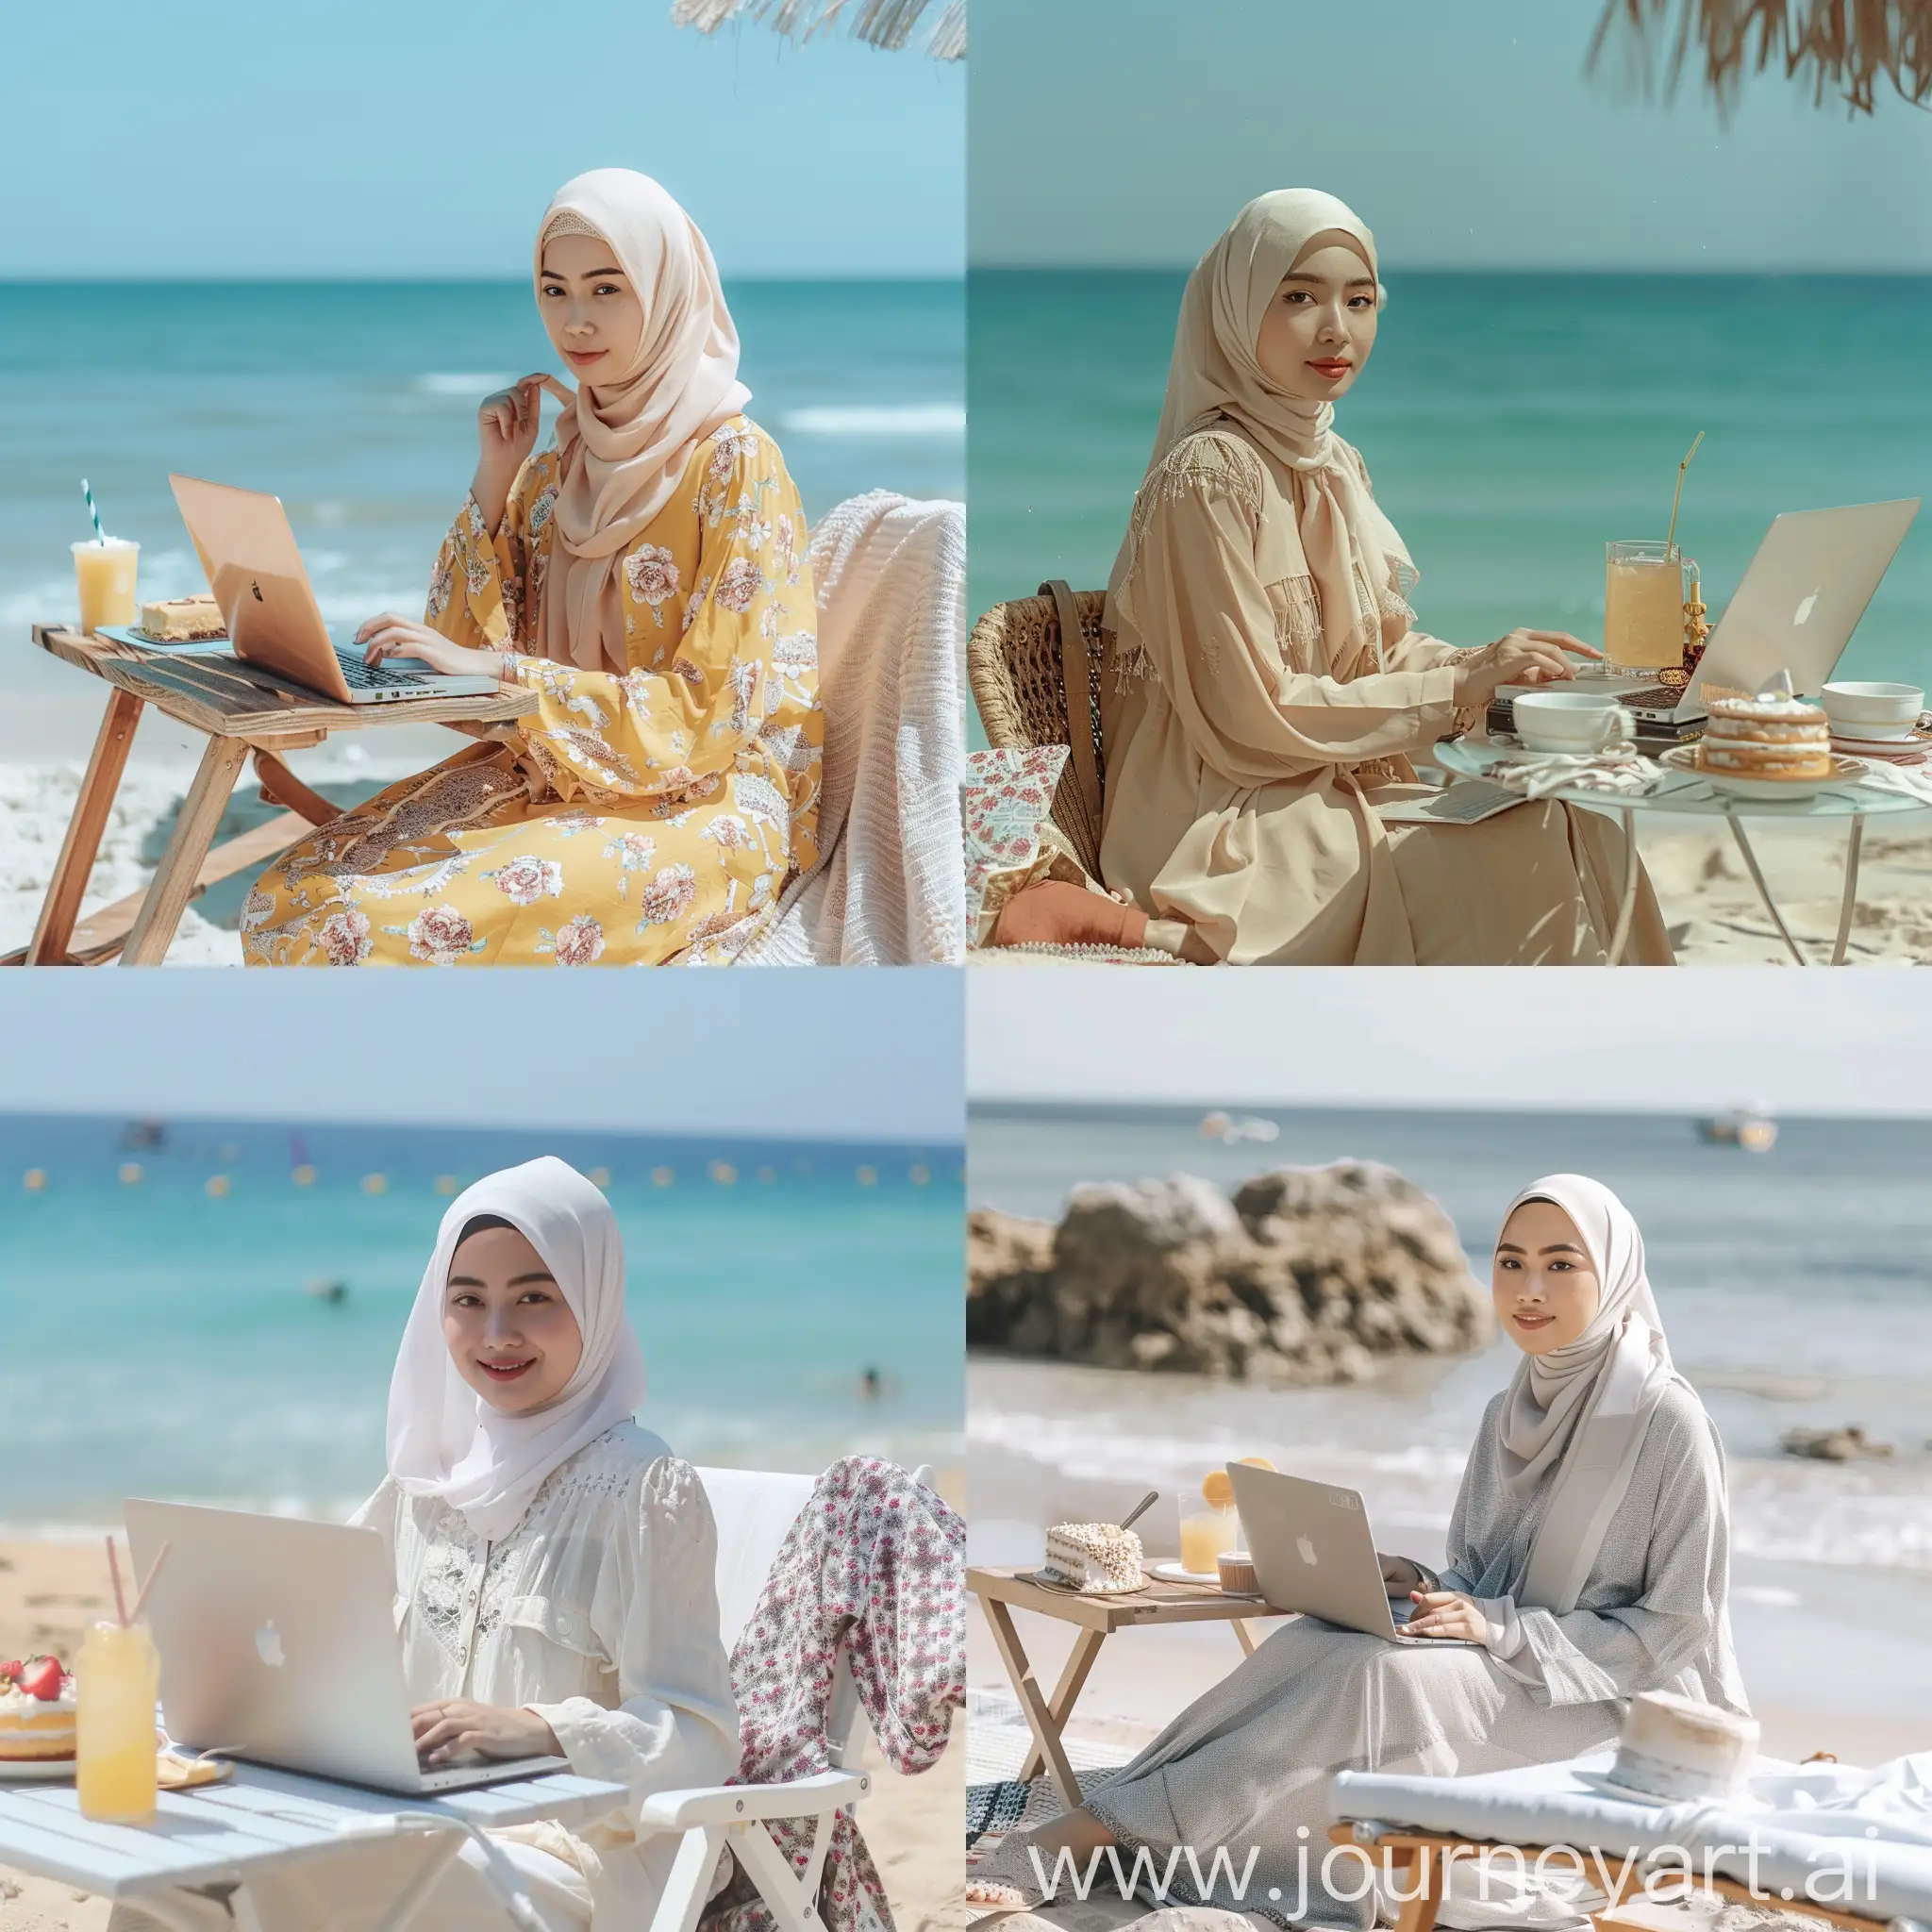 Young-Korean-Woman-in-Hijab-Relaxing-on-the-Beach-with-Laptop-and-Summer-Refreshments